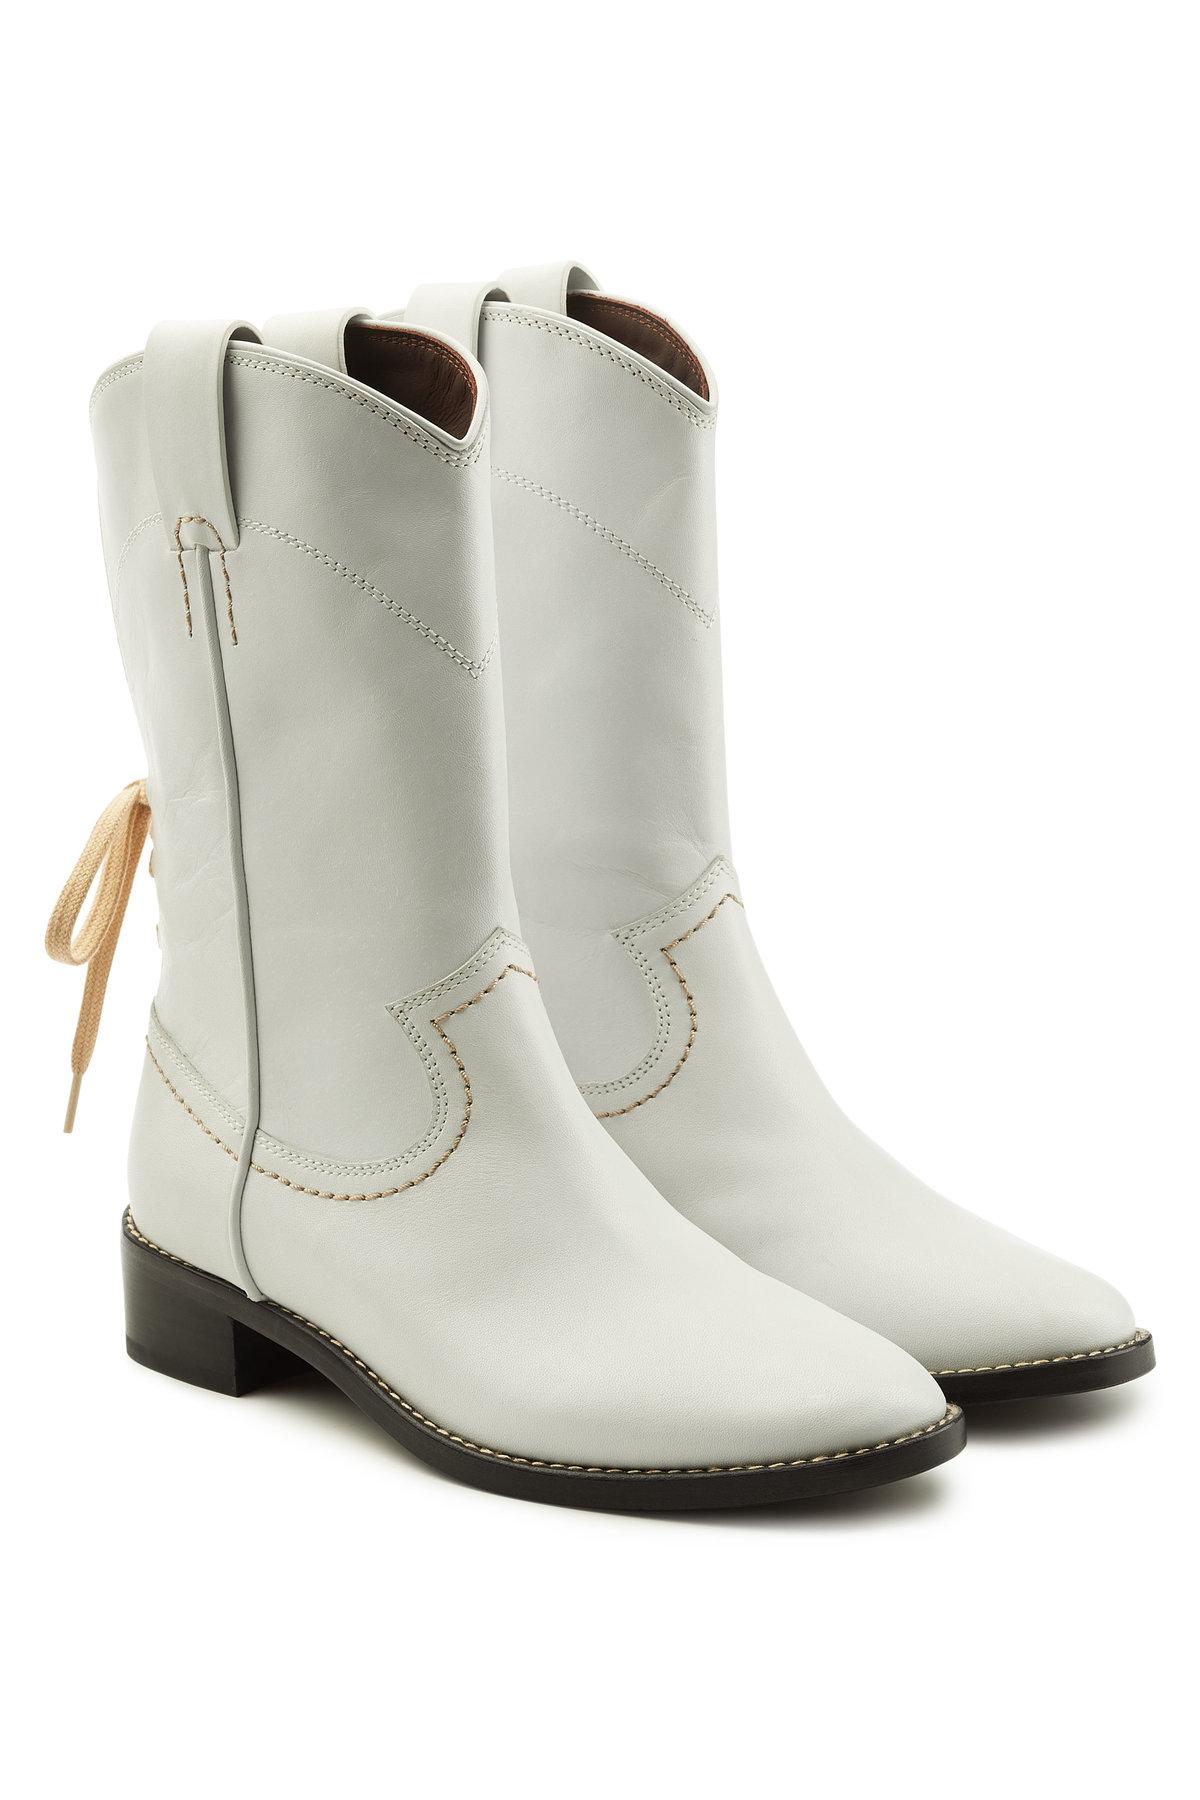 chloe white ankle boots